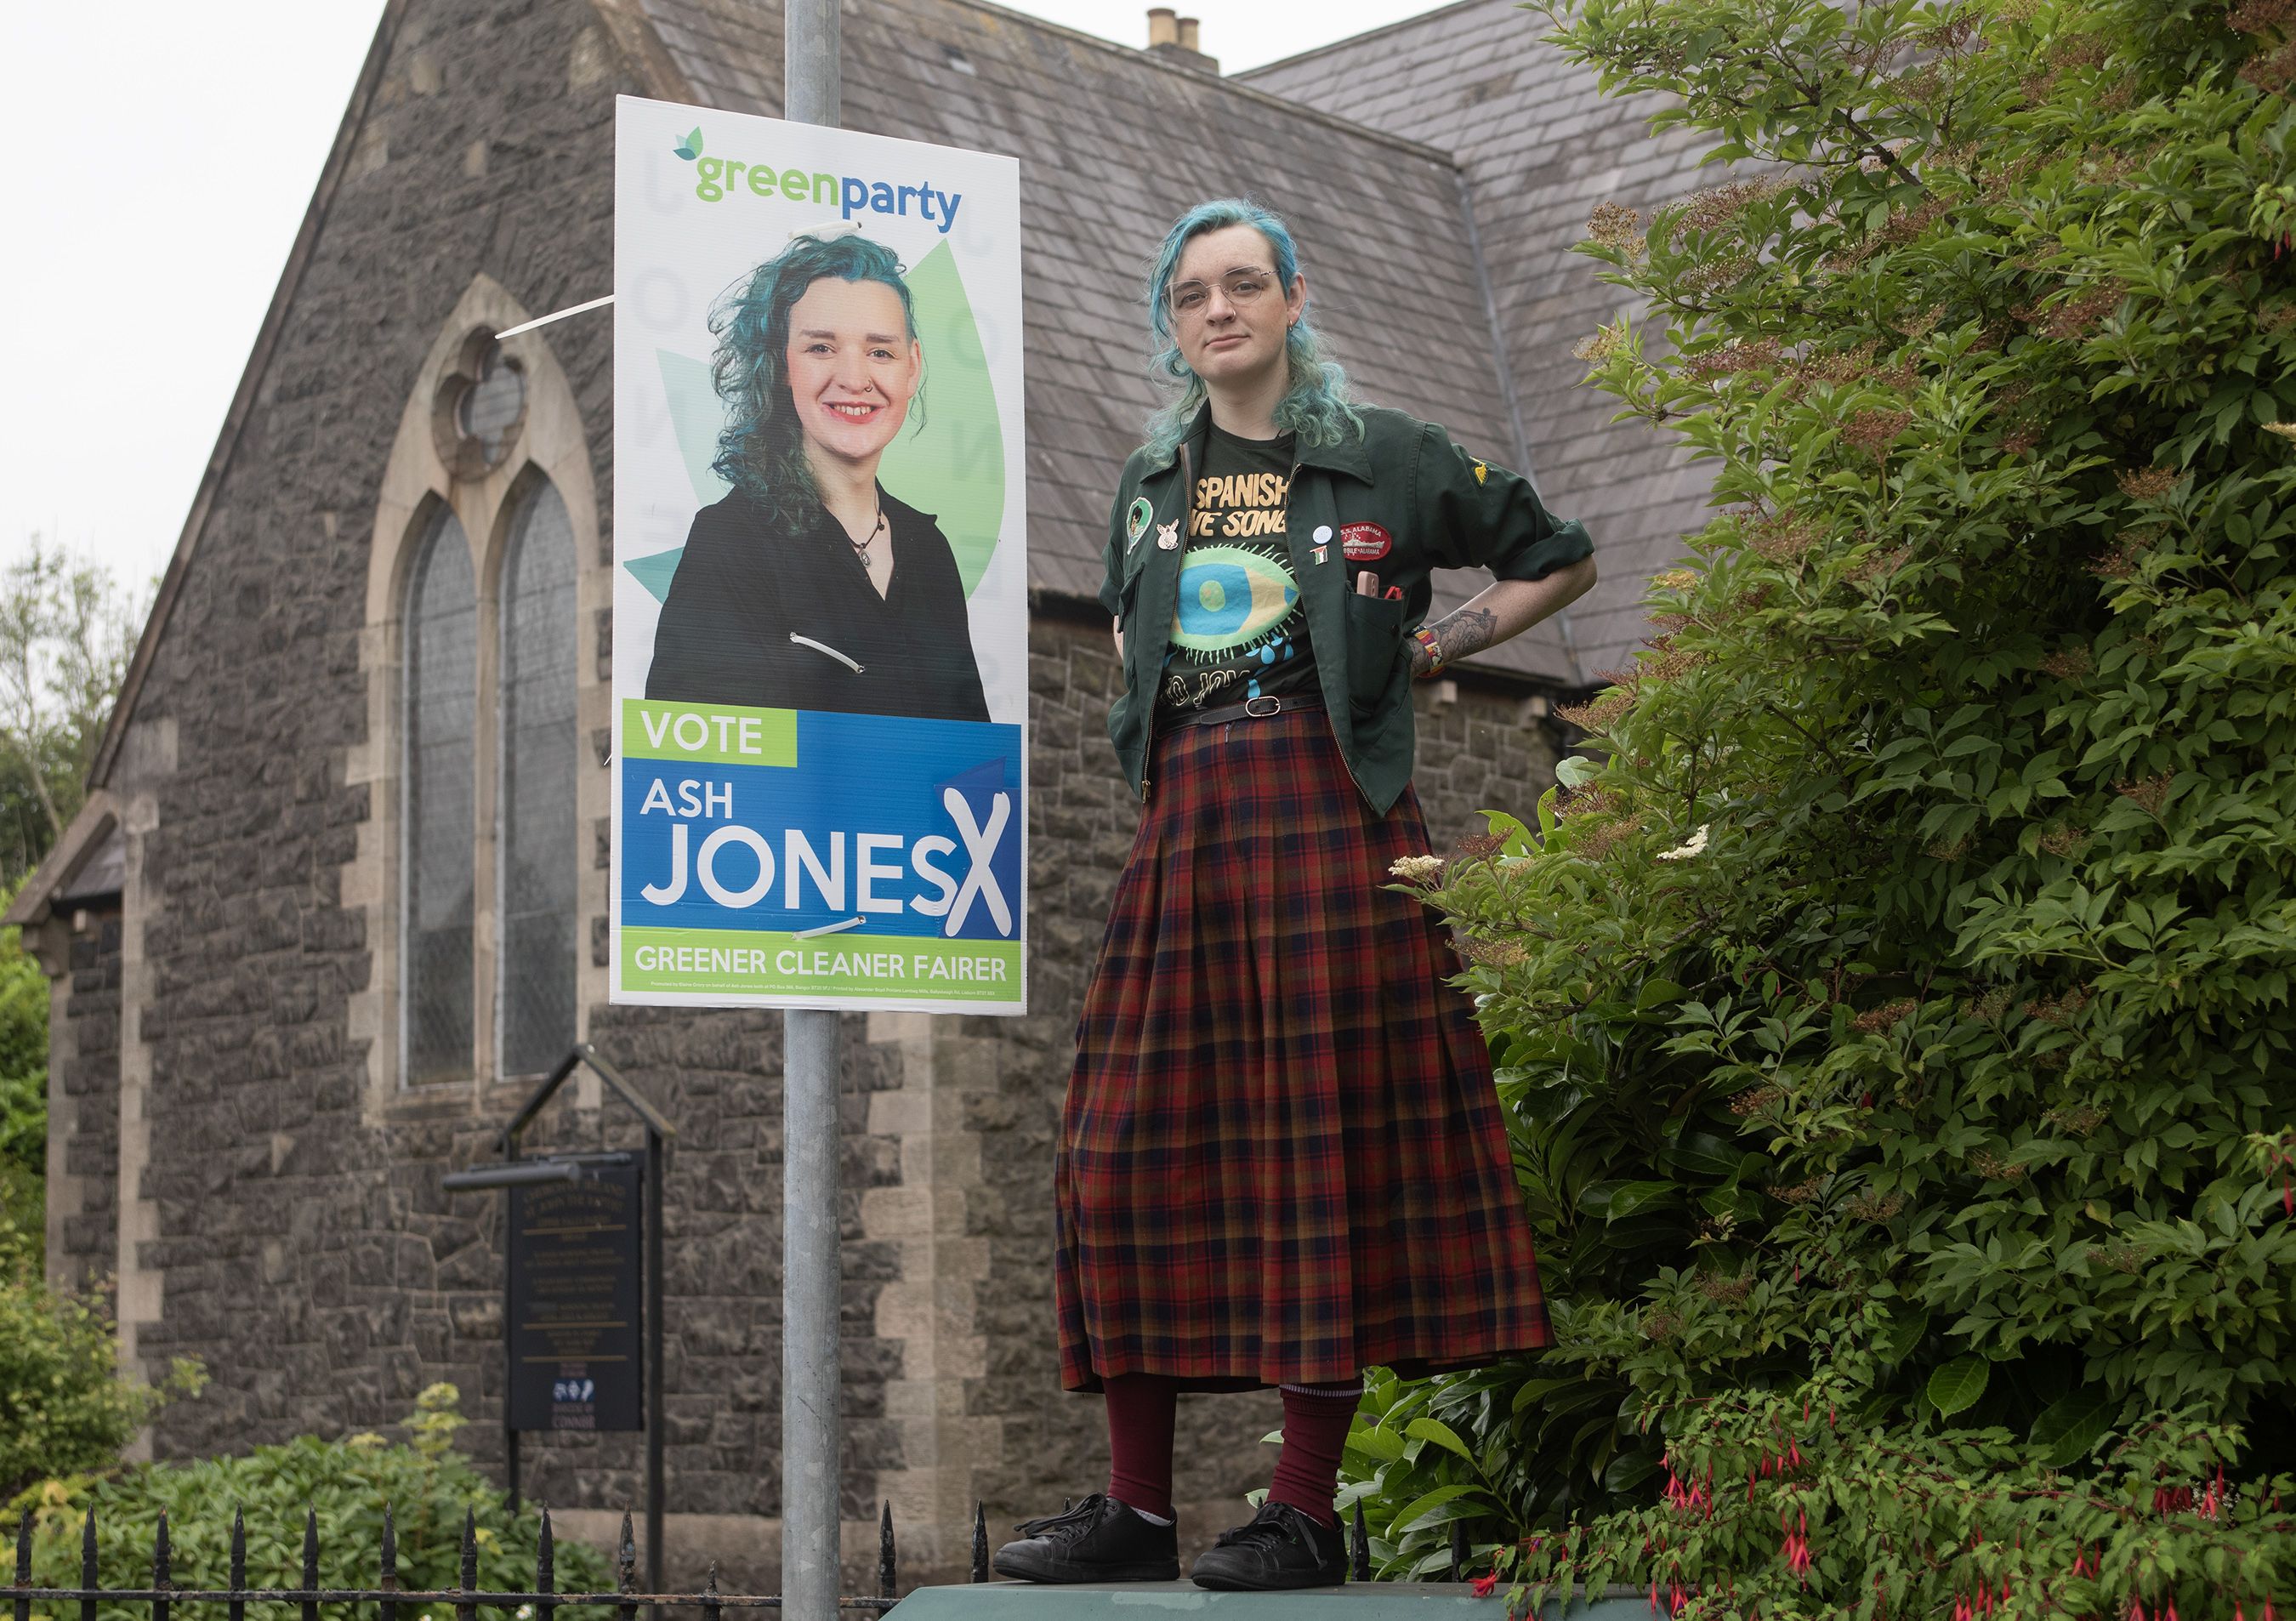 STANDING UP: Green Party candidate Ash Jones